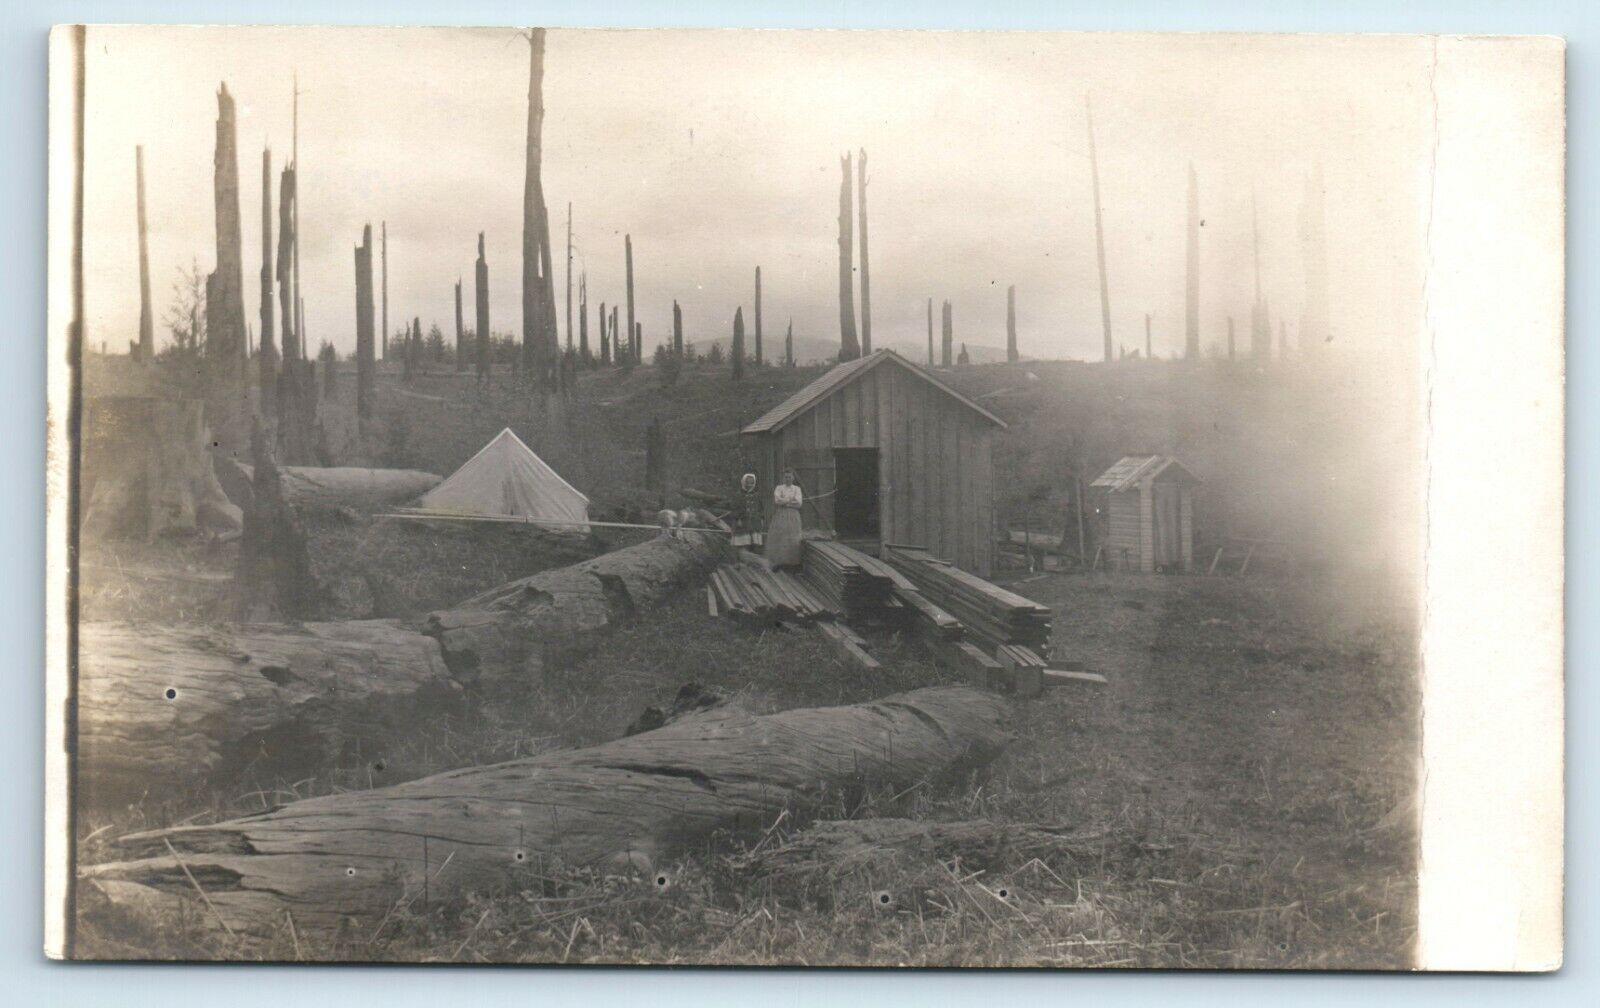 Postcard at Luna's, Nov 1912 Wood Lumber Camp shack outhouse tent RPPC B198